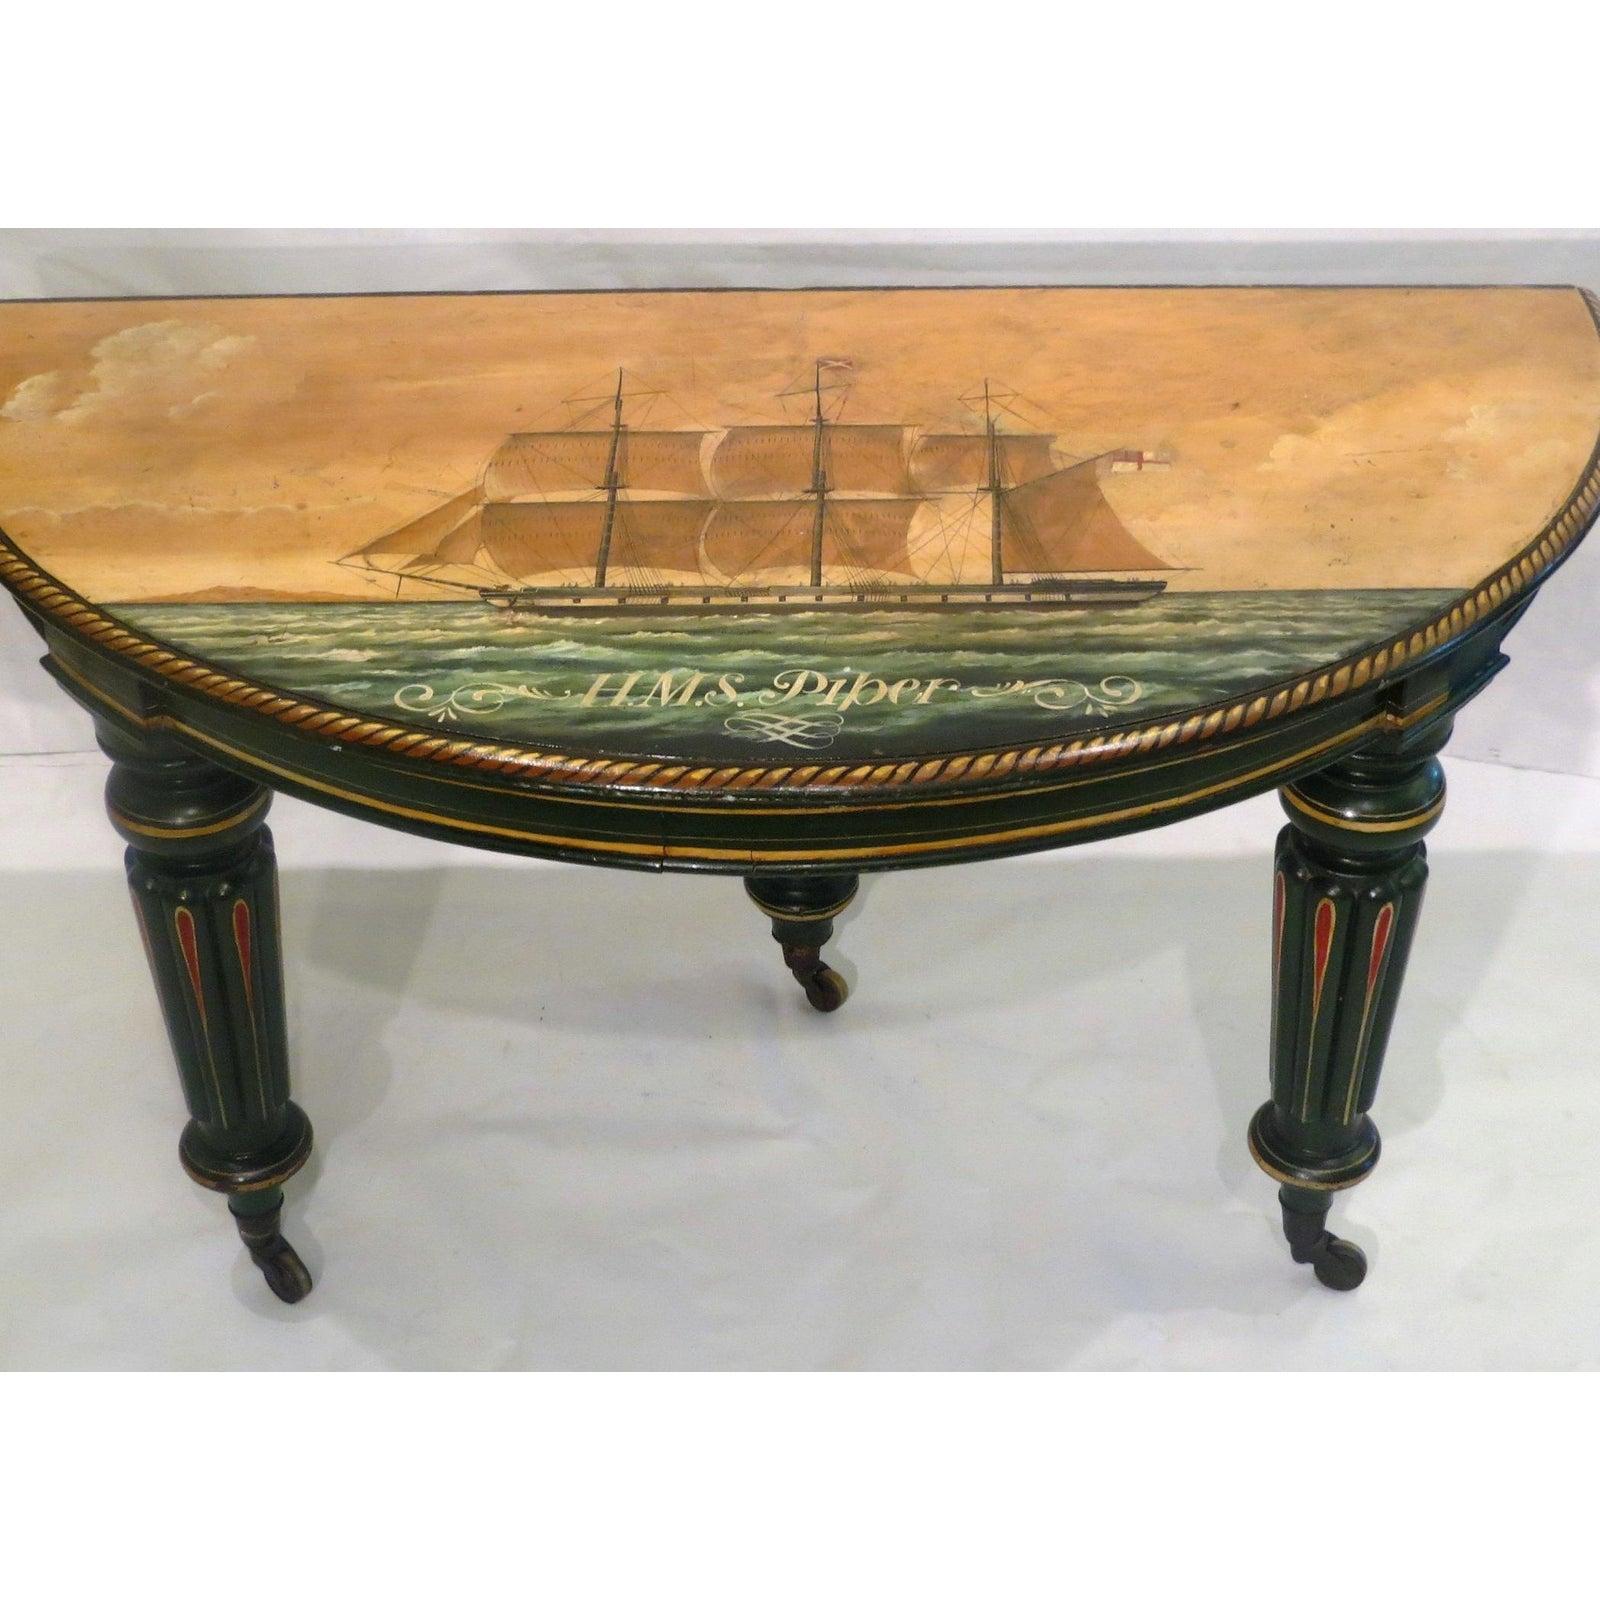 English Antique Regency Period Breakfast Table with Nautical Ship Paintings